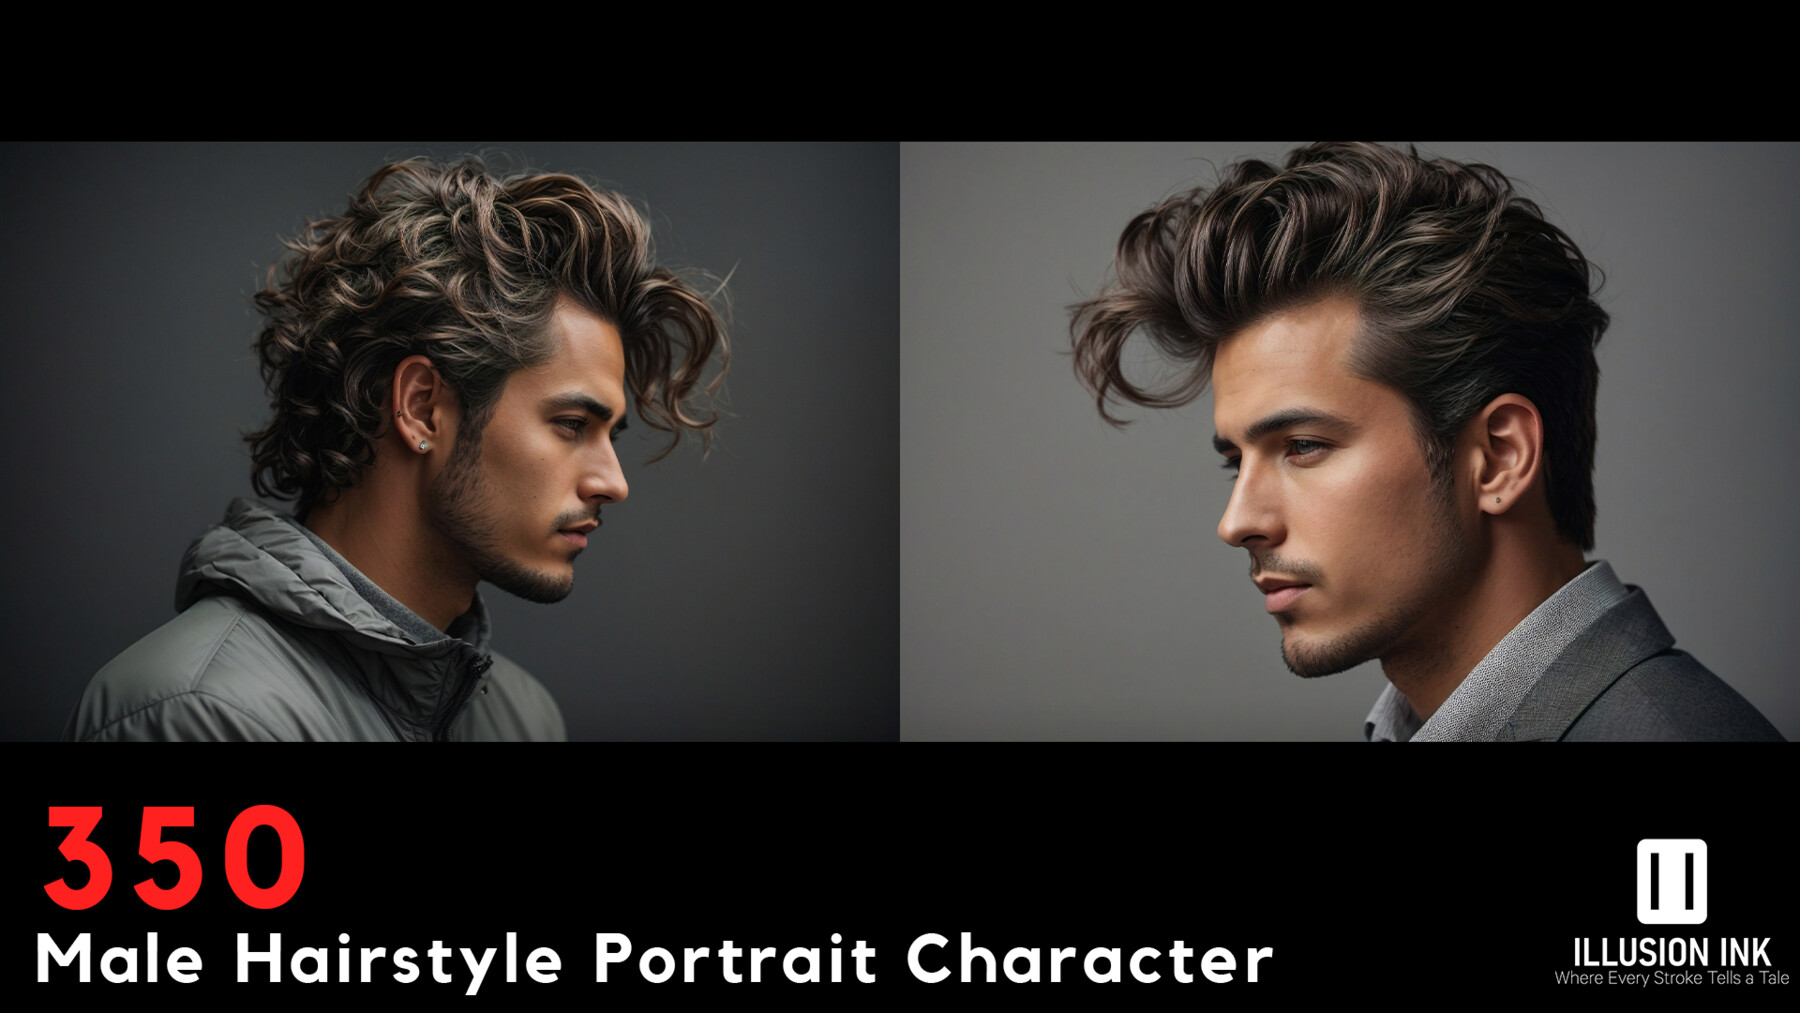 ArtStation - 350 Male Hairstyle Portrait Character References | 8K ...